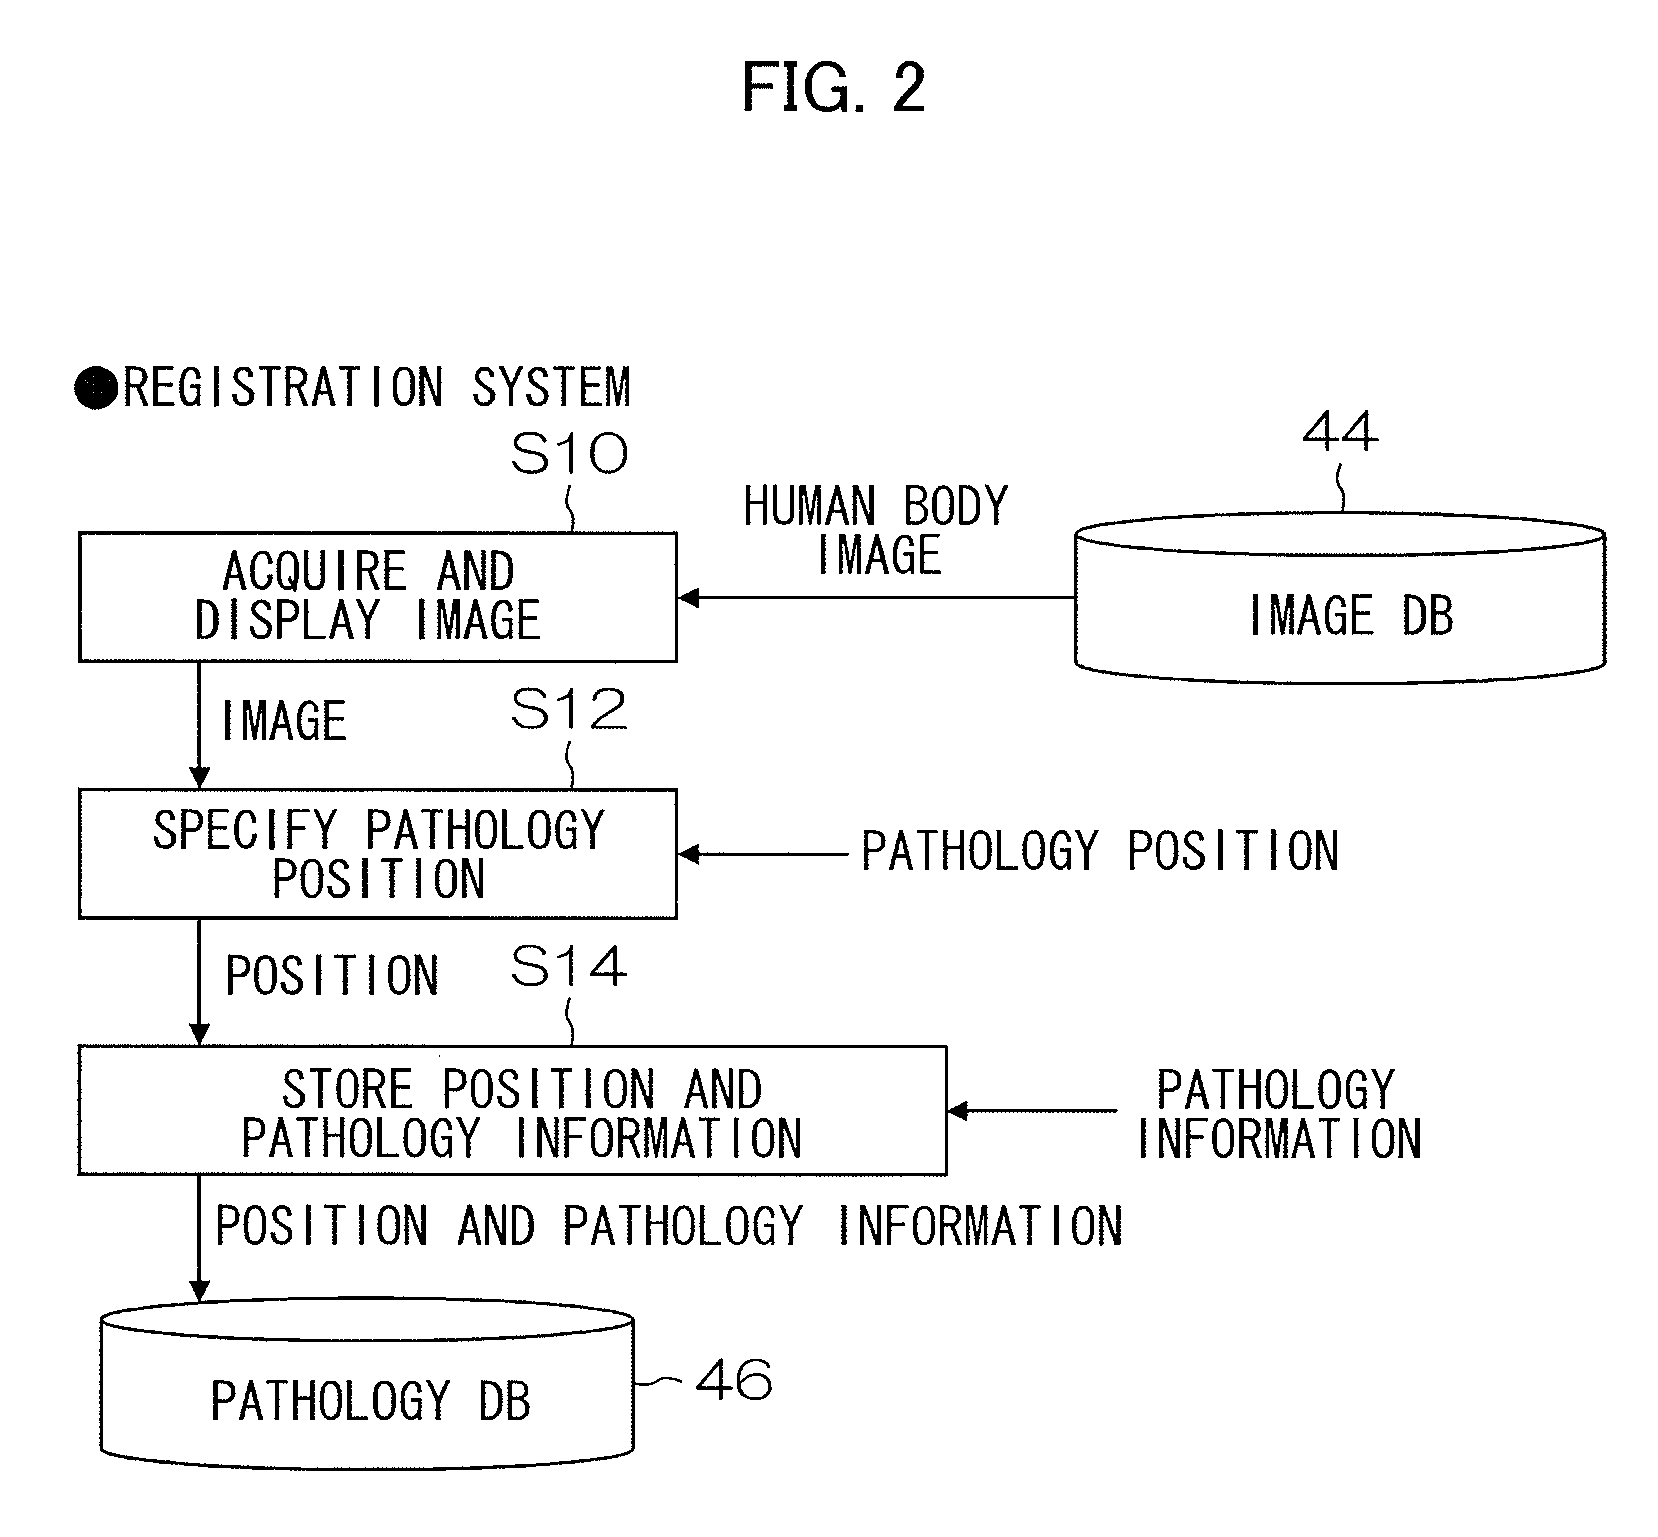 Radiographic image display apparatus, and its method and computer program product